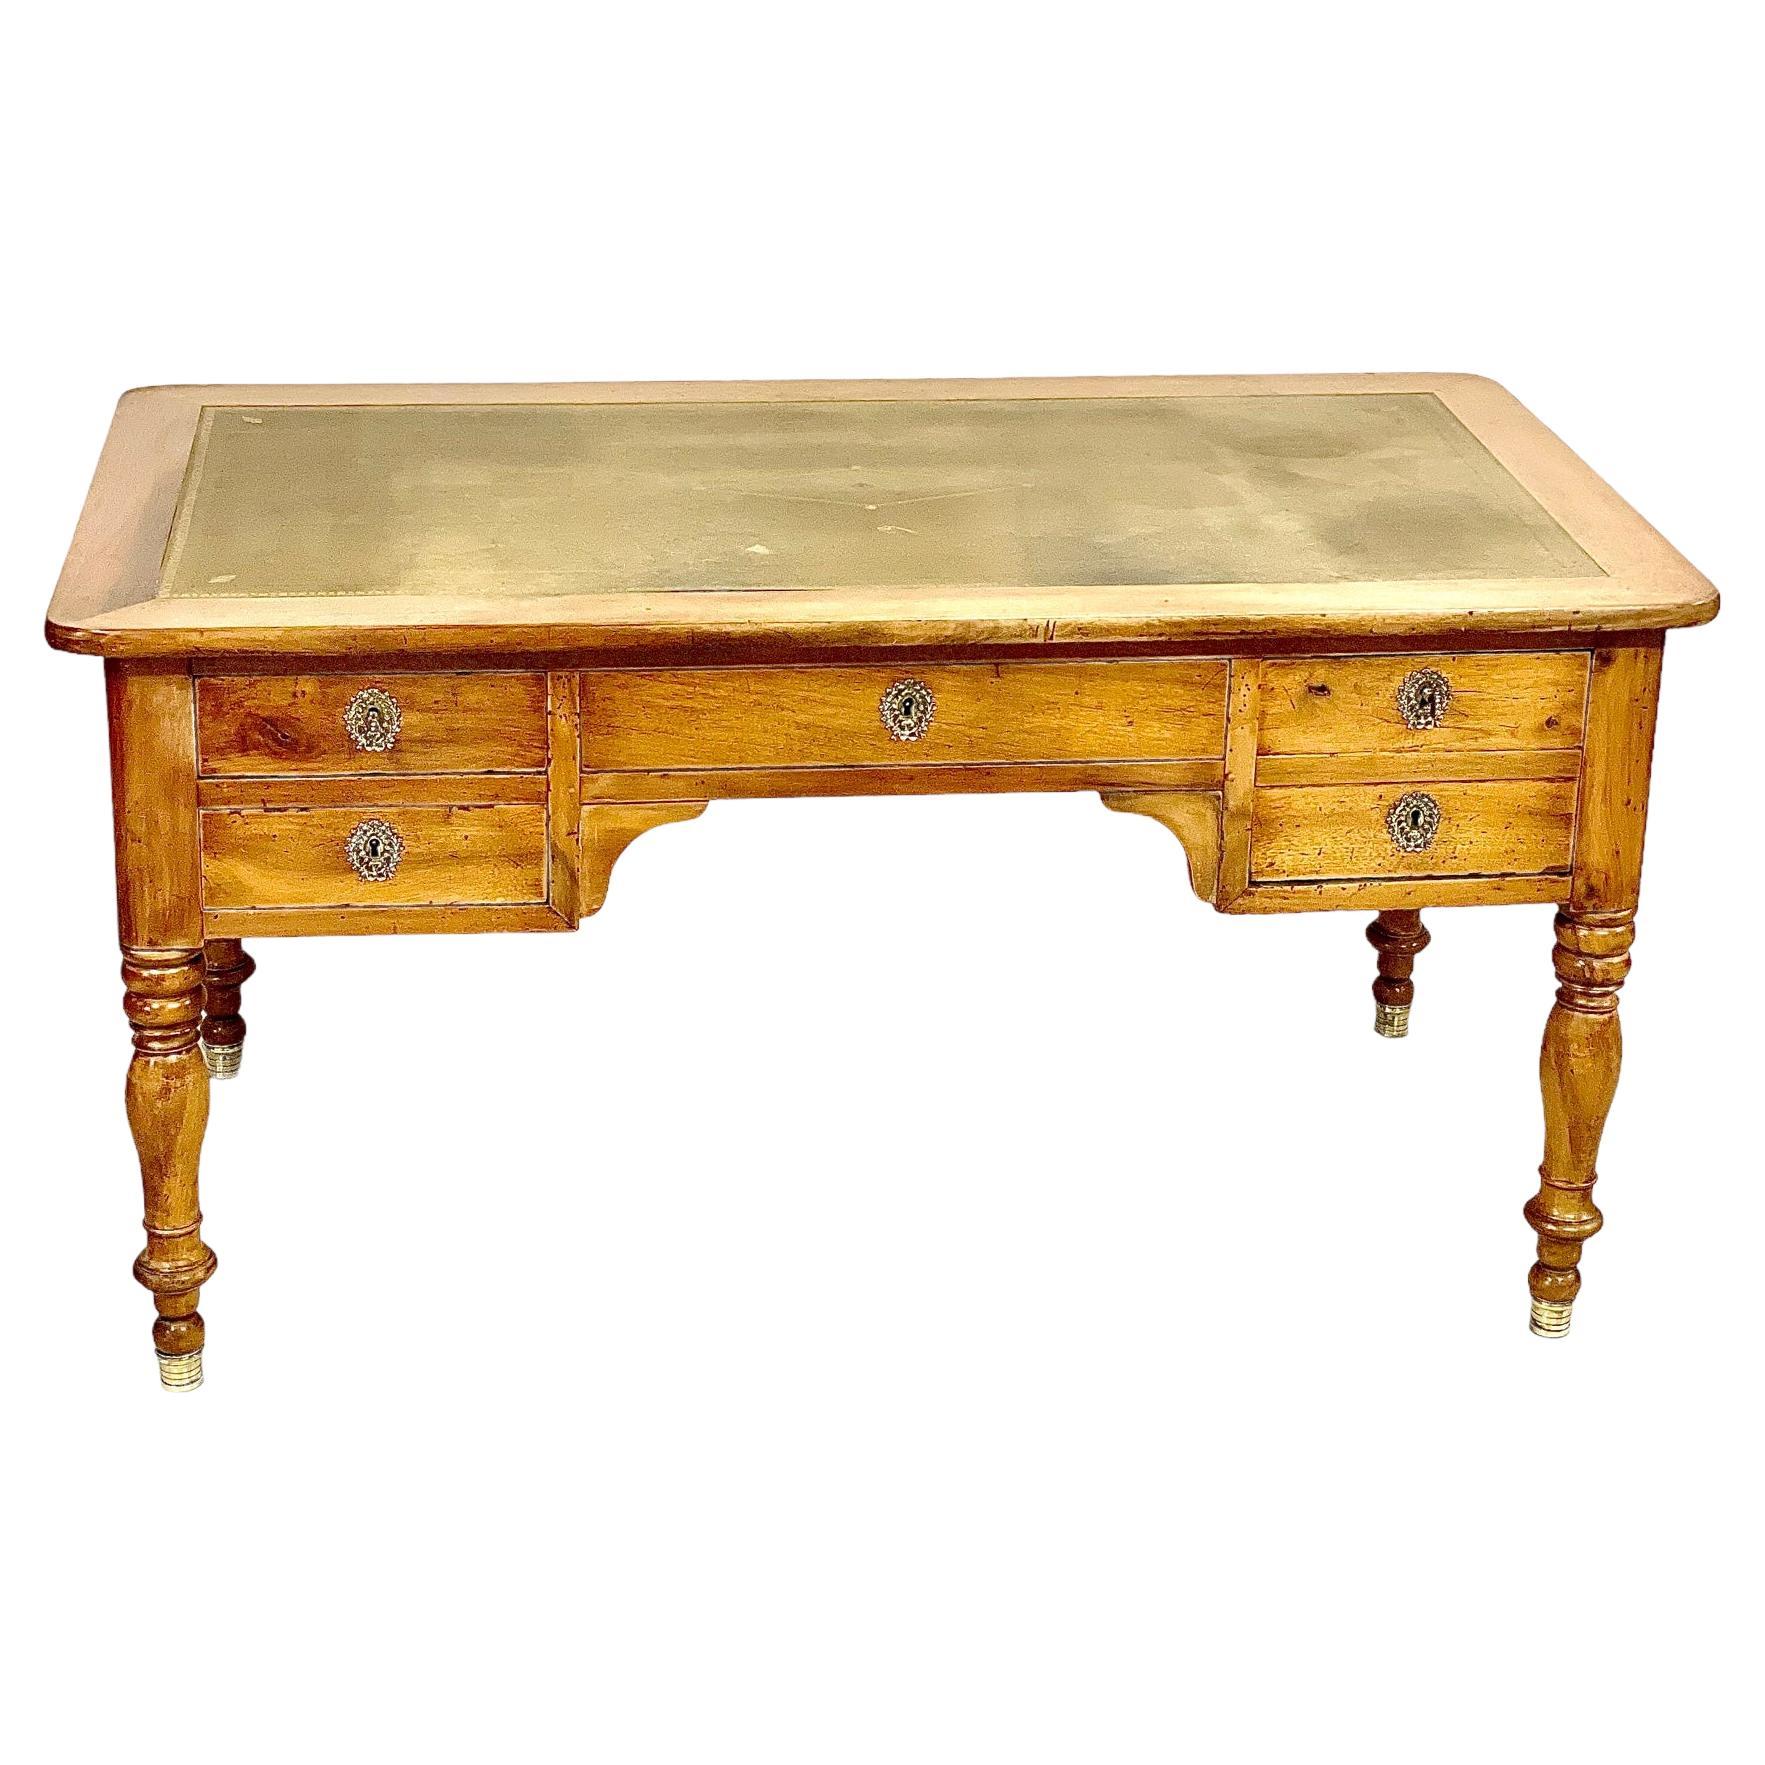 19th Century Wooden Partners' Desk For Sale